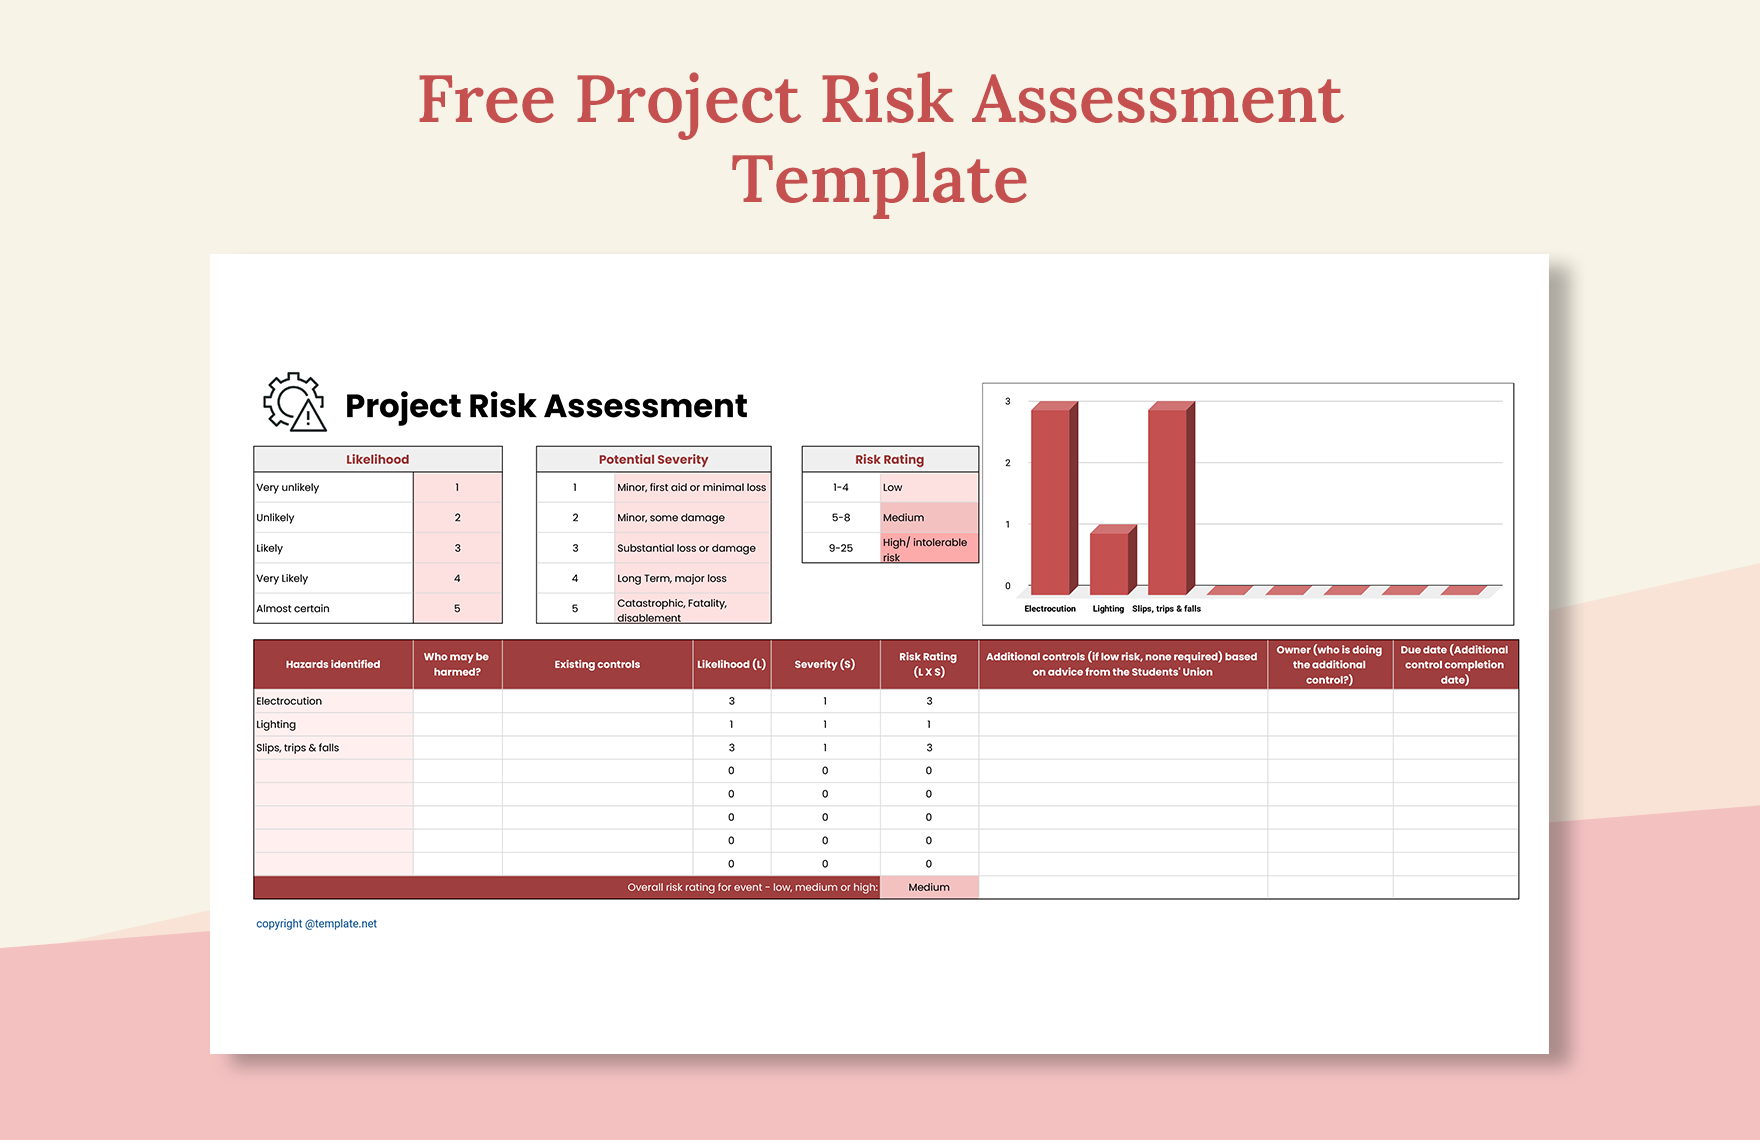 Free Project Risk Assessment Template